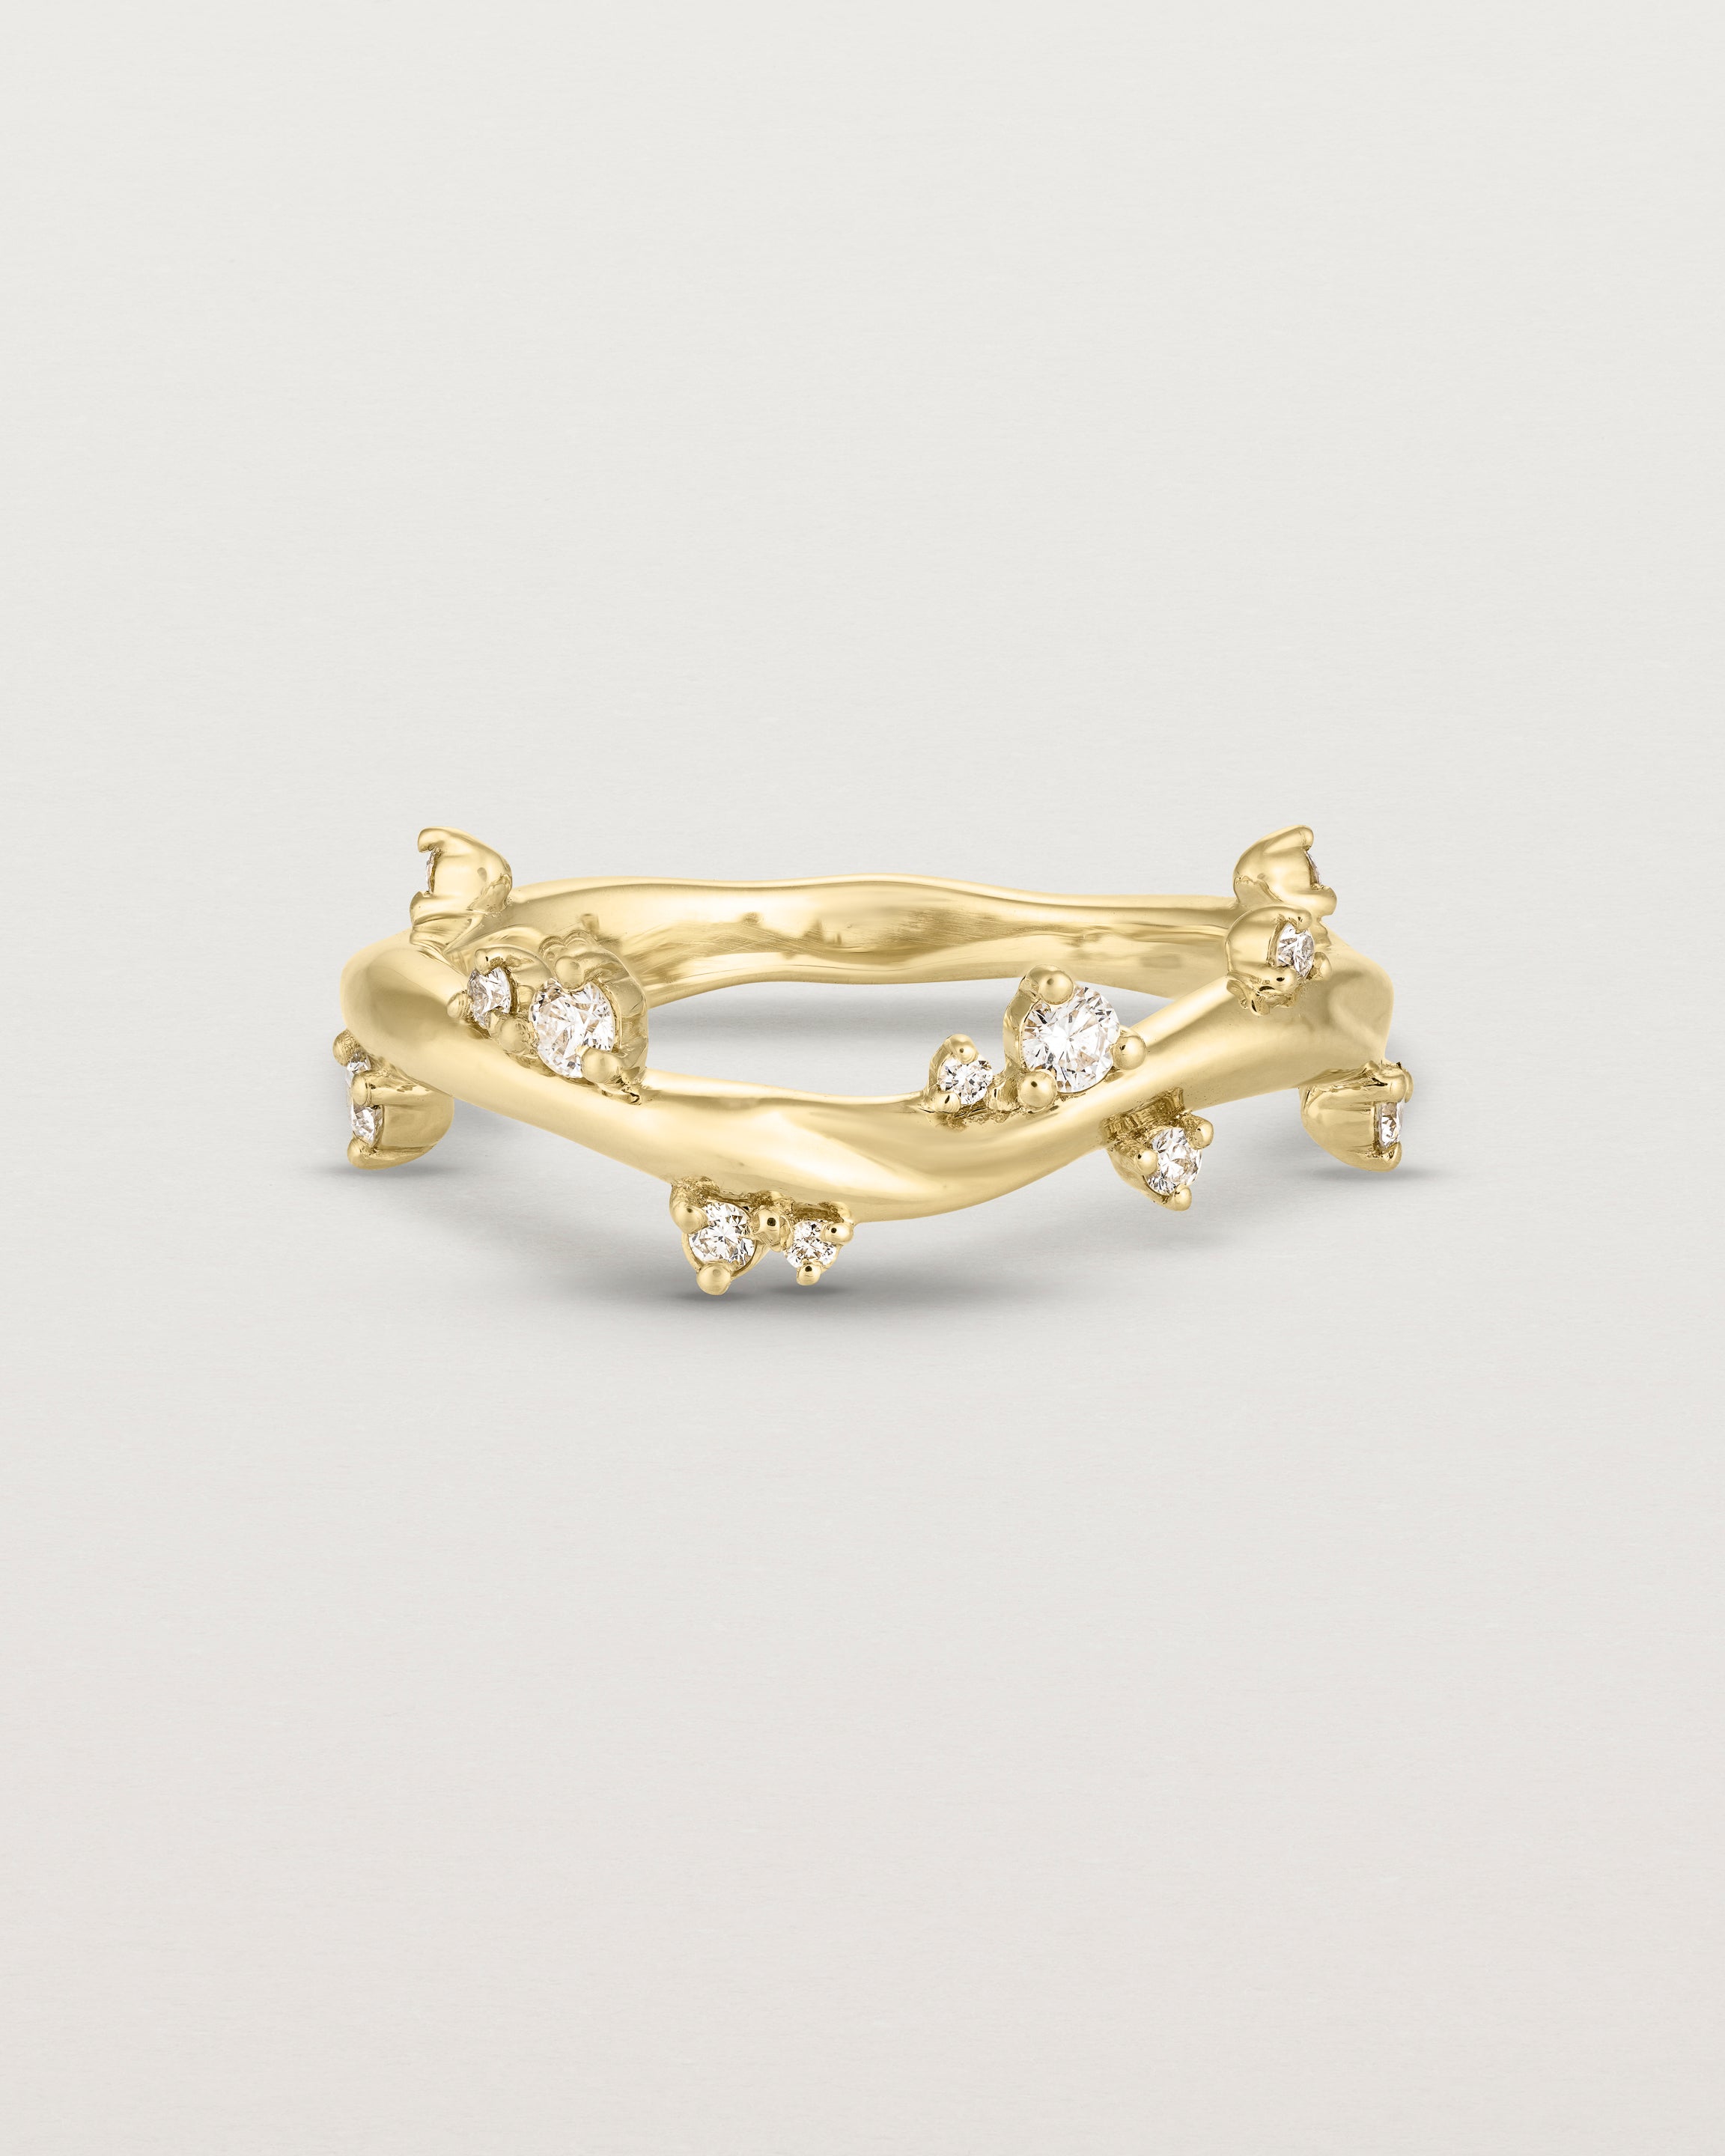 Product photo of the yellow gold Ember ring with white diamonds scattered around the band.